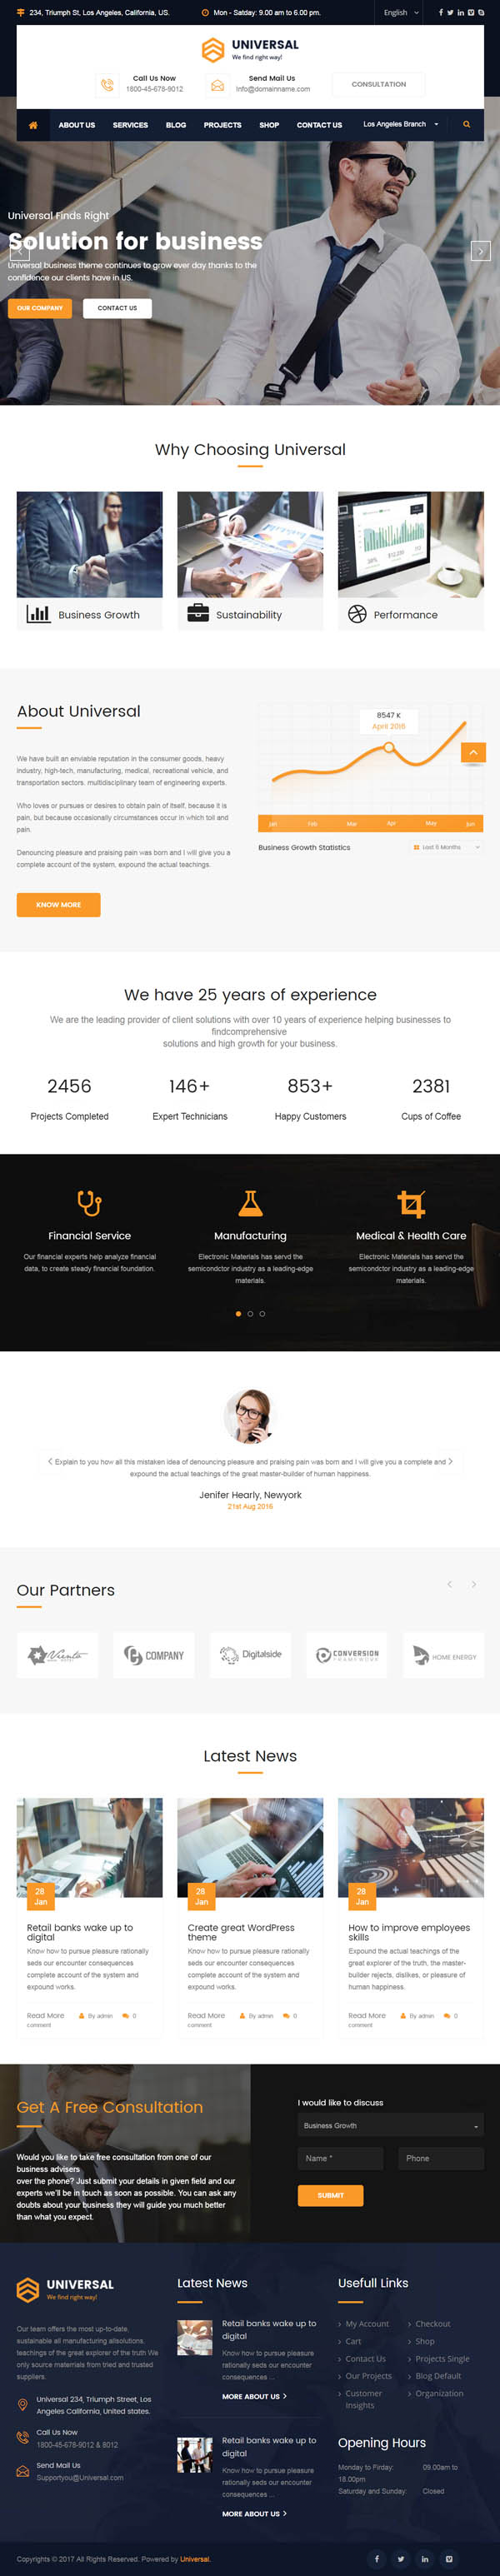 Universal : Business Consulting and Professional Services WordPress Theme